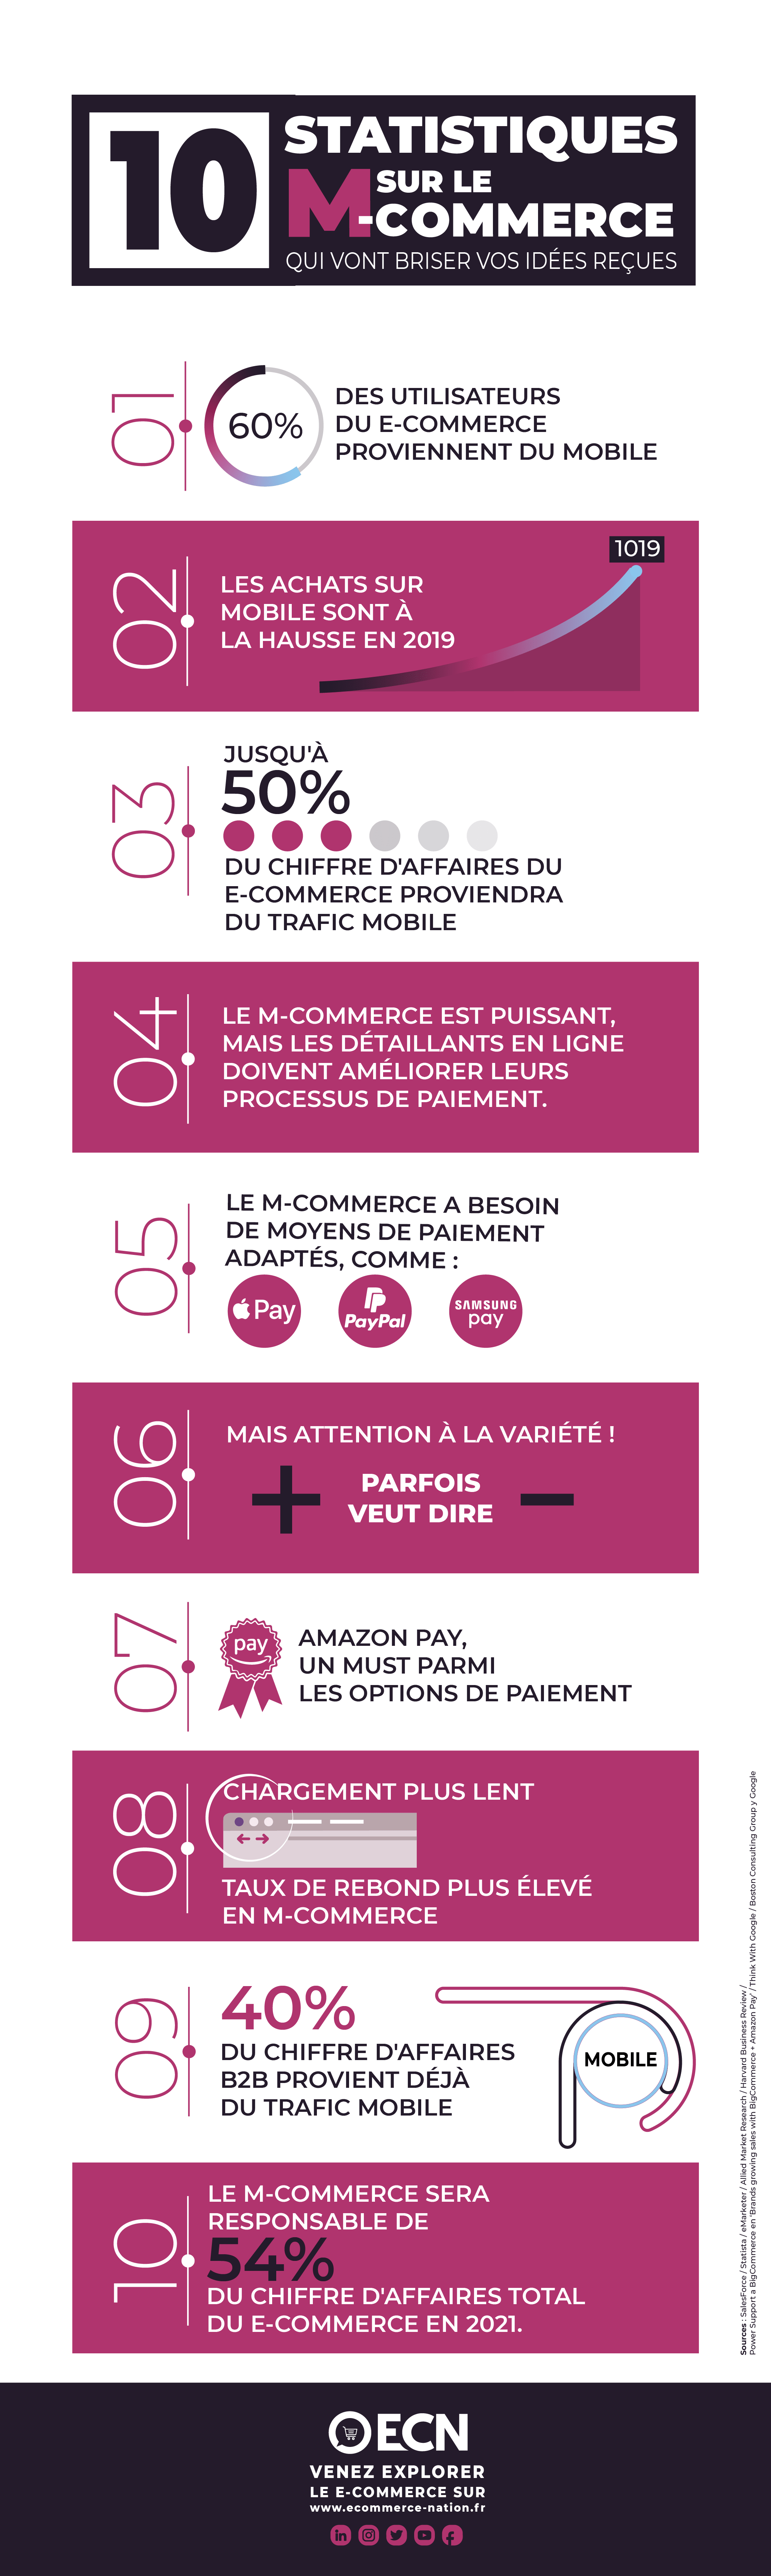 statistiques mcommerce image infographie complete